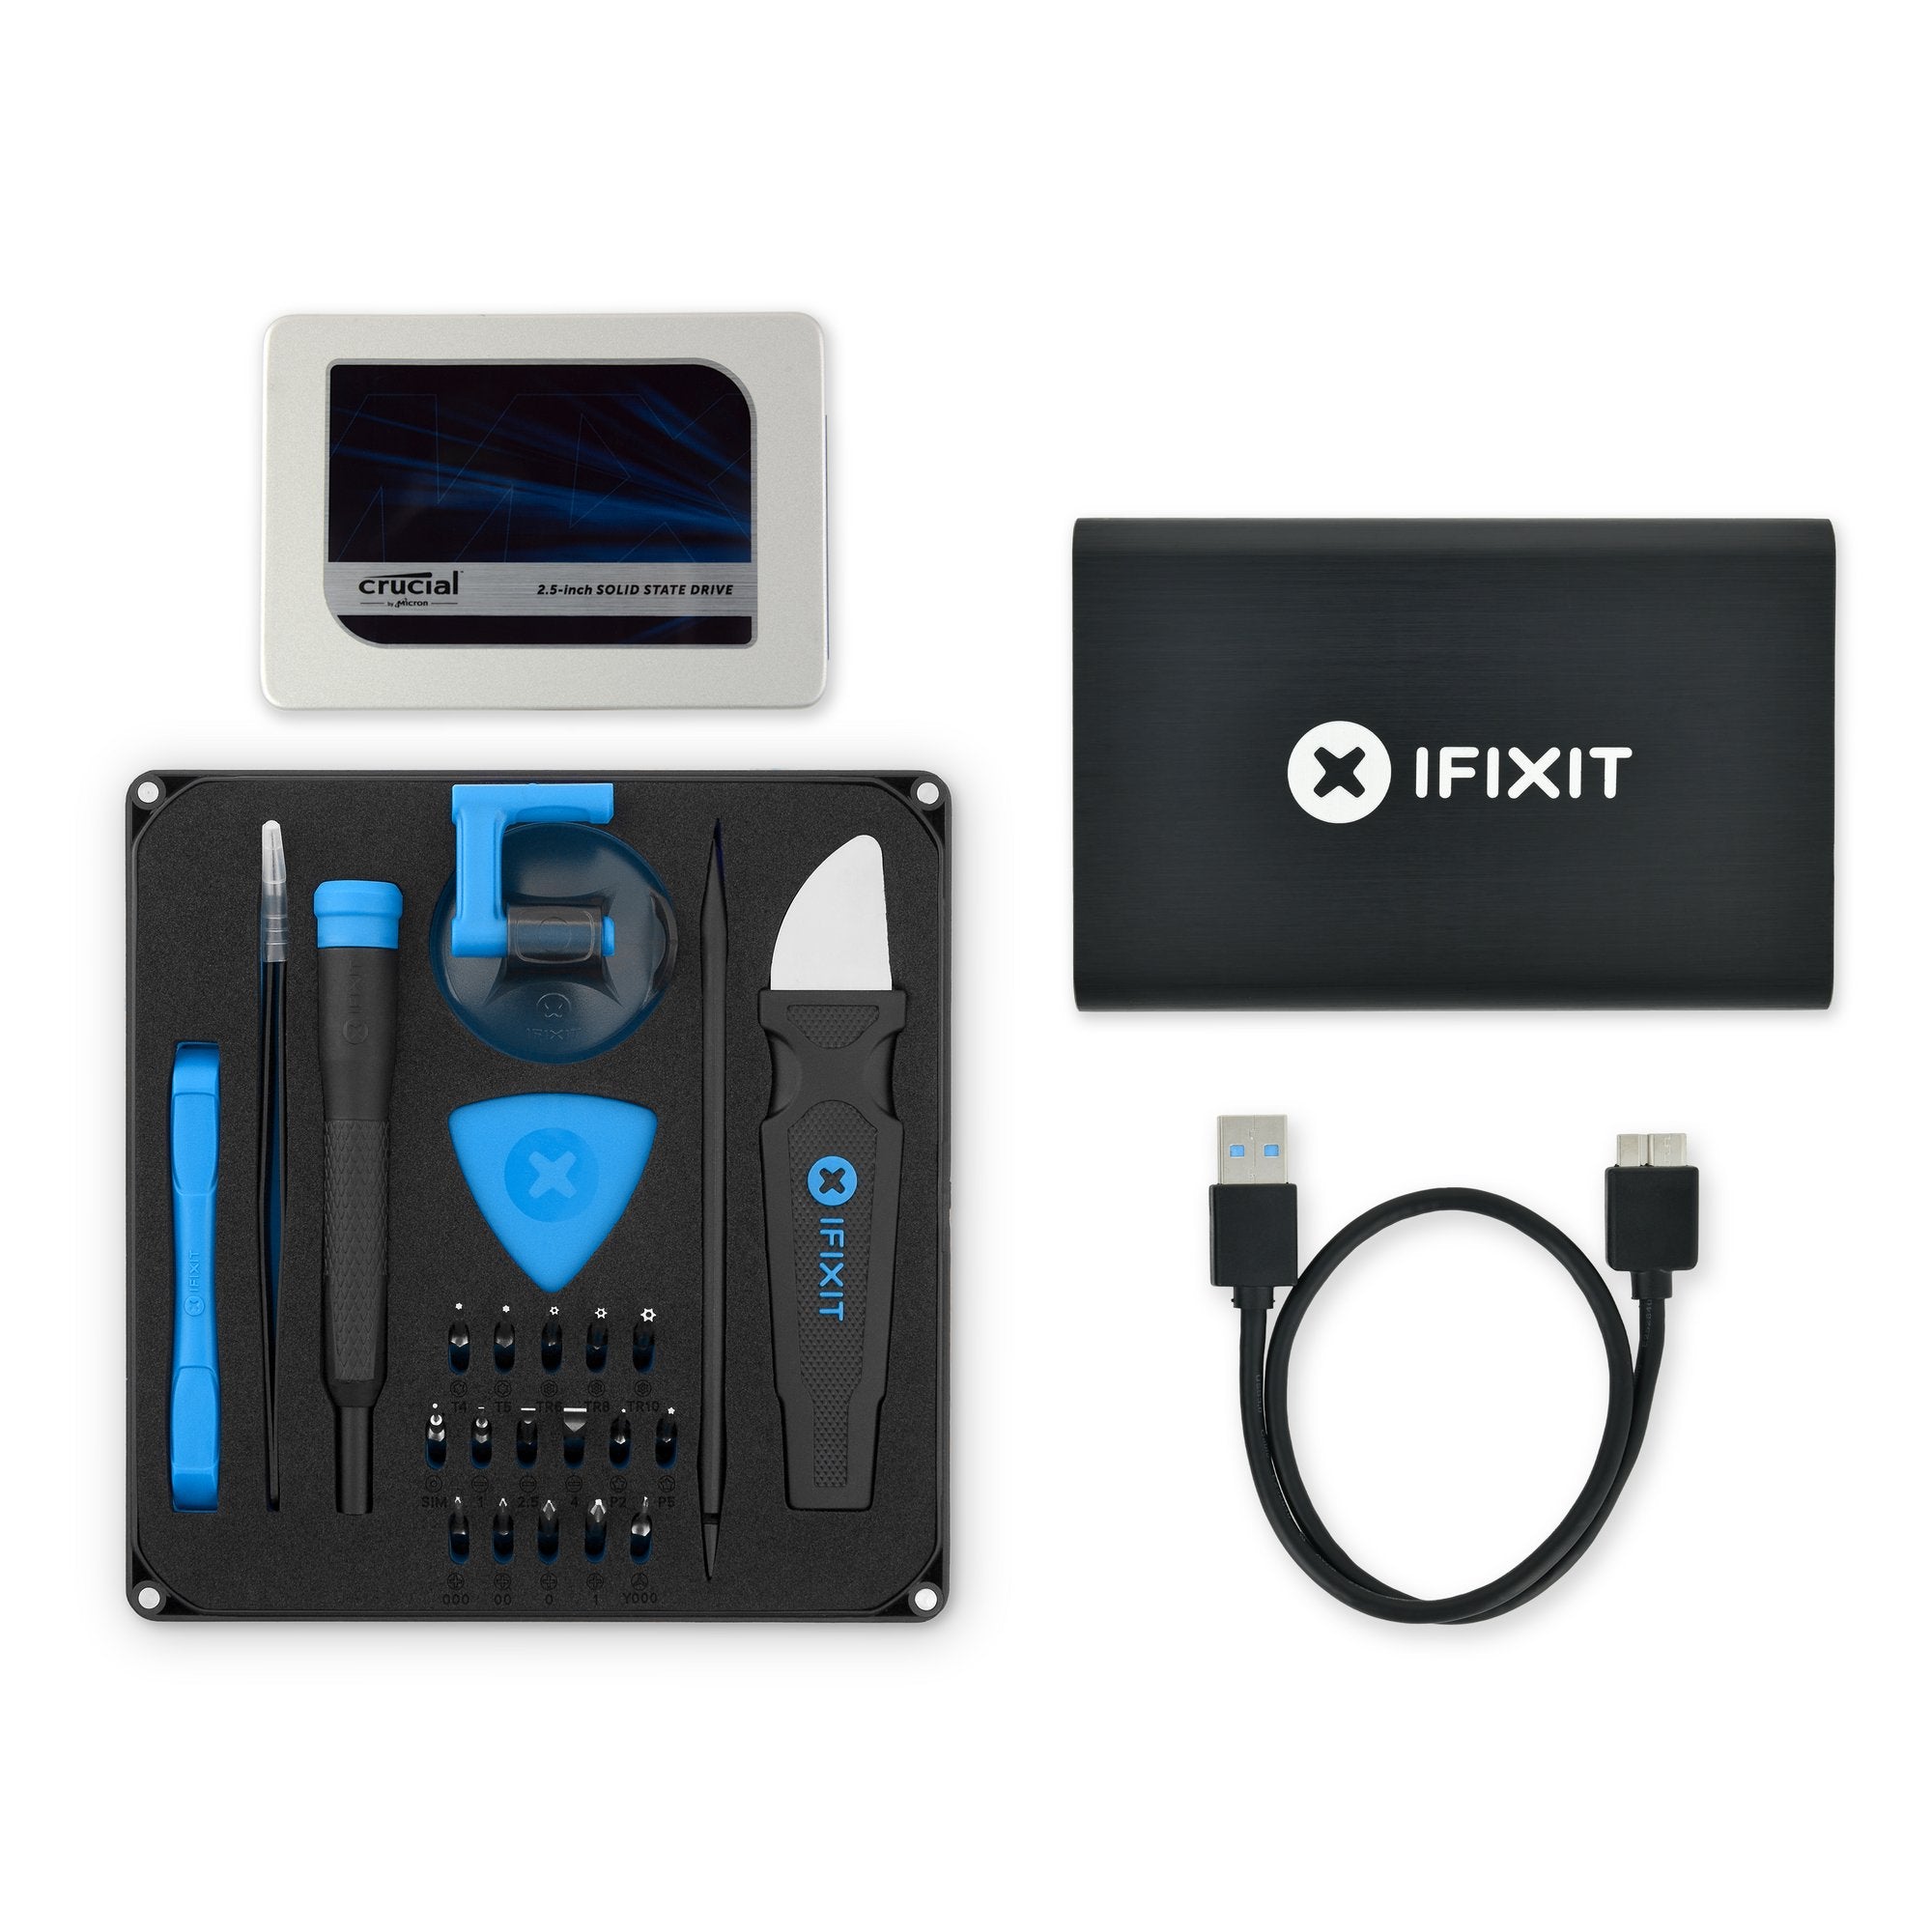 Crucial 1 TB SSD—Your complete iFixit Fix Kit: a Crucial SSD, iFixit & Instructions. Two-year Quality Guarantee.